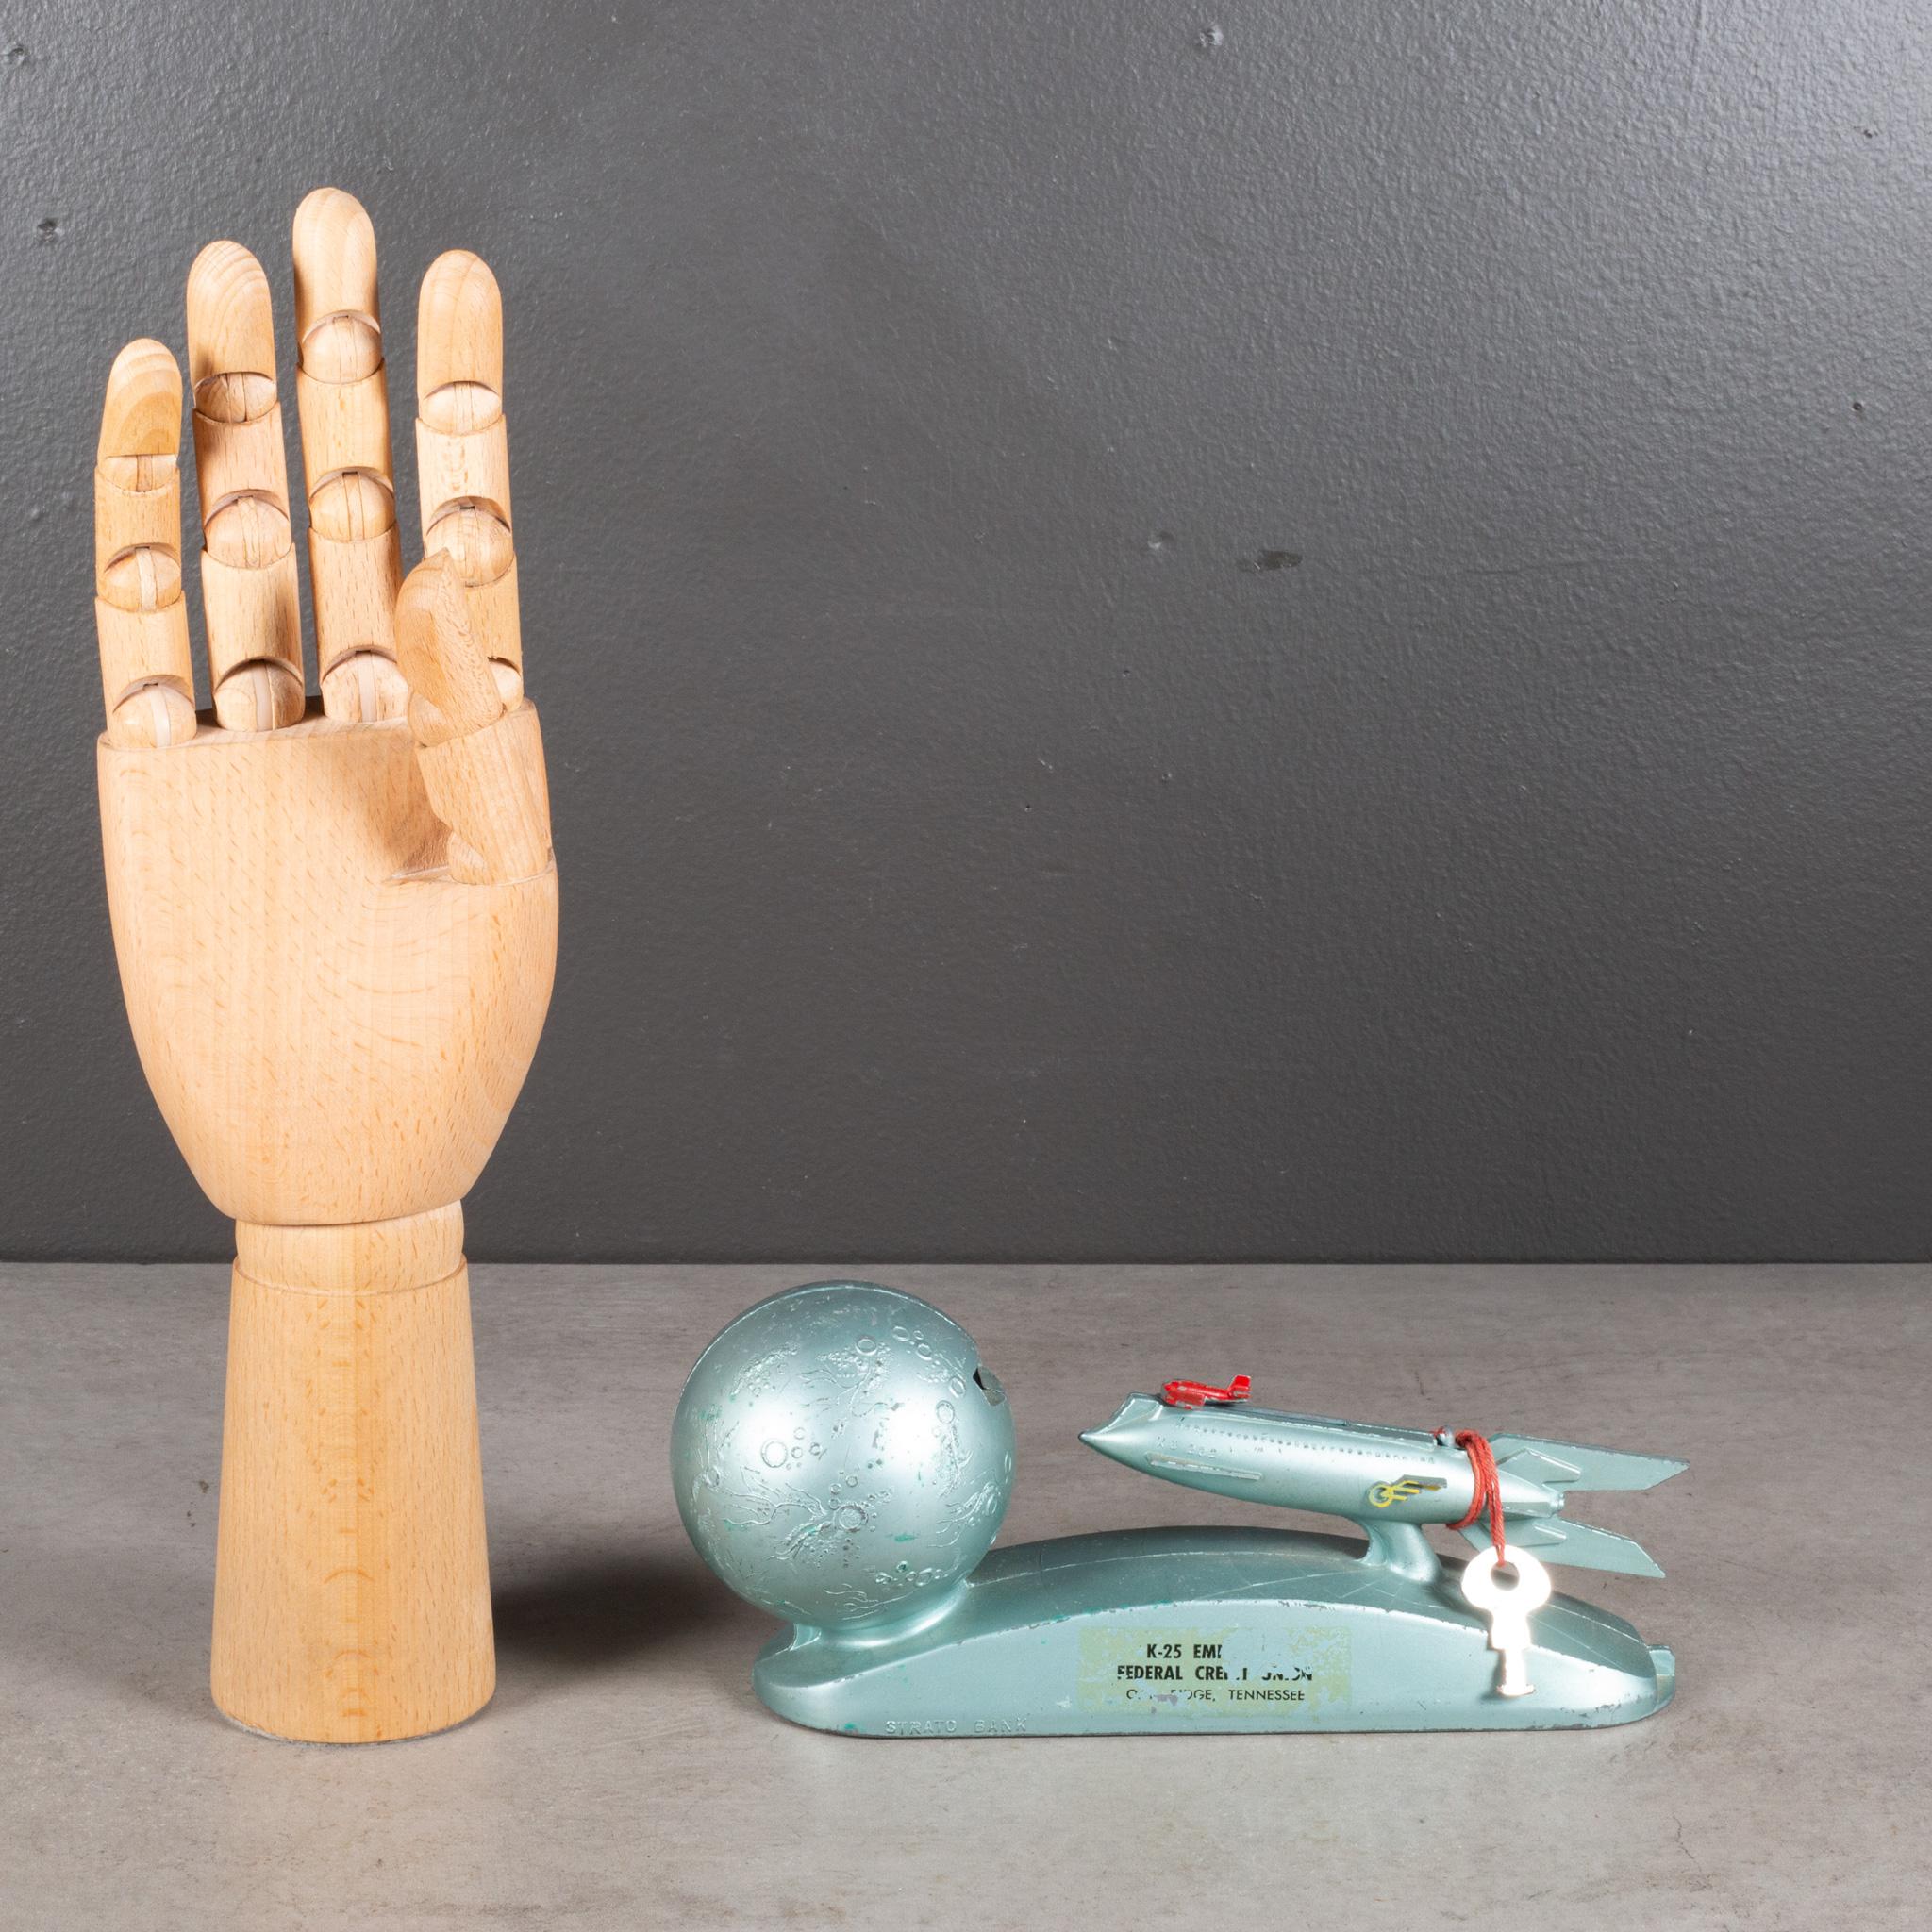 20th Century Mid-century Strato Moon Rocket Mechanical Bank c.1950  (FREE SHIPPING) For Sale